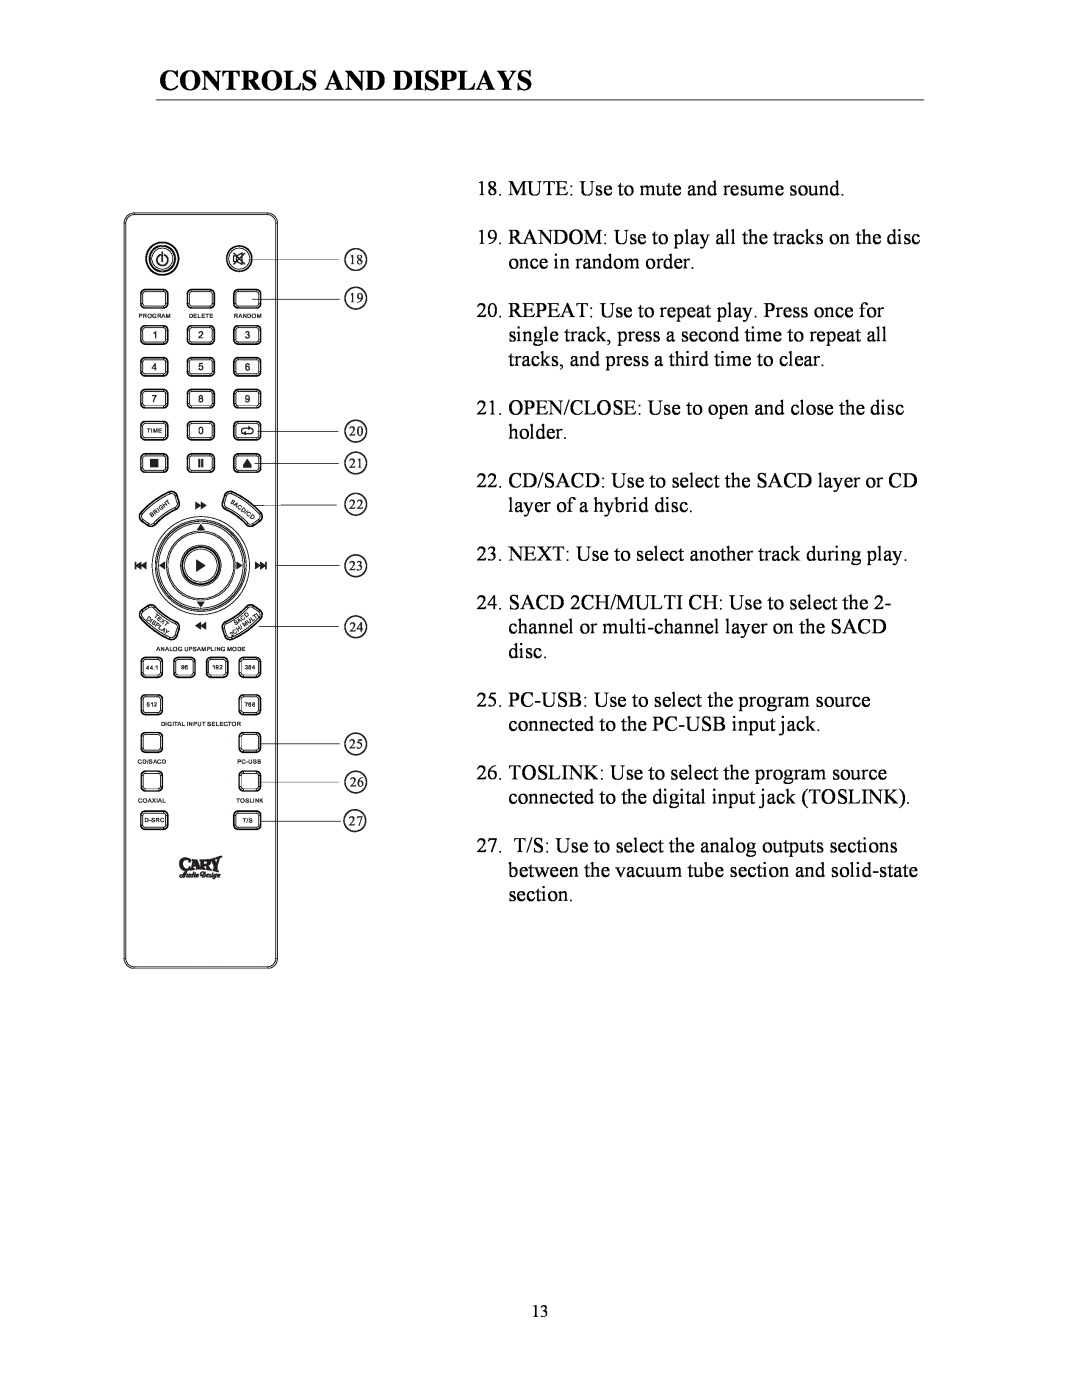 Cary Audio Design CD 303T SACD specifications Controls And Displays, MUTE Use to mute and resume sound 